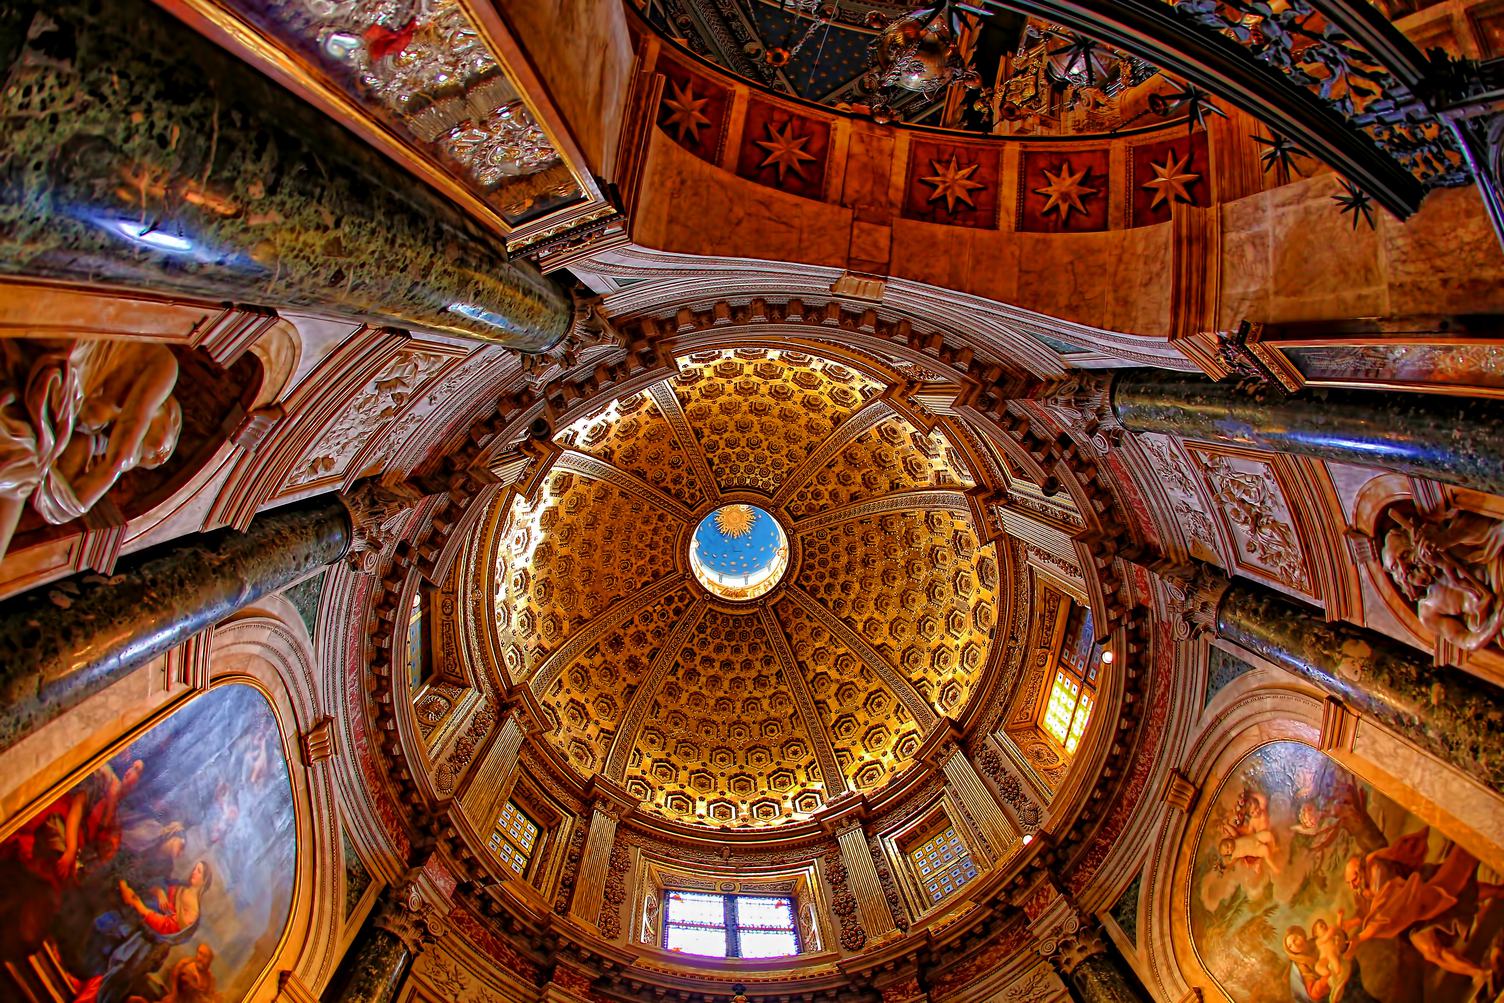 Marvelous Dome of Siena Cathedral Interior